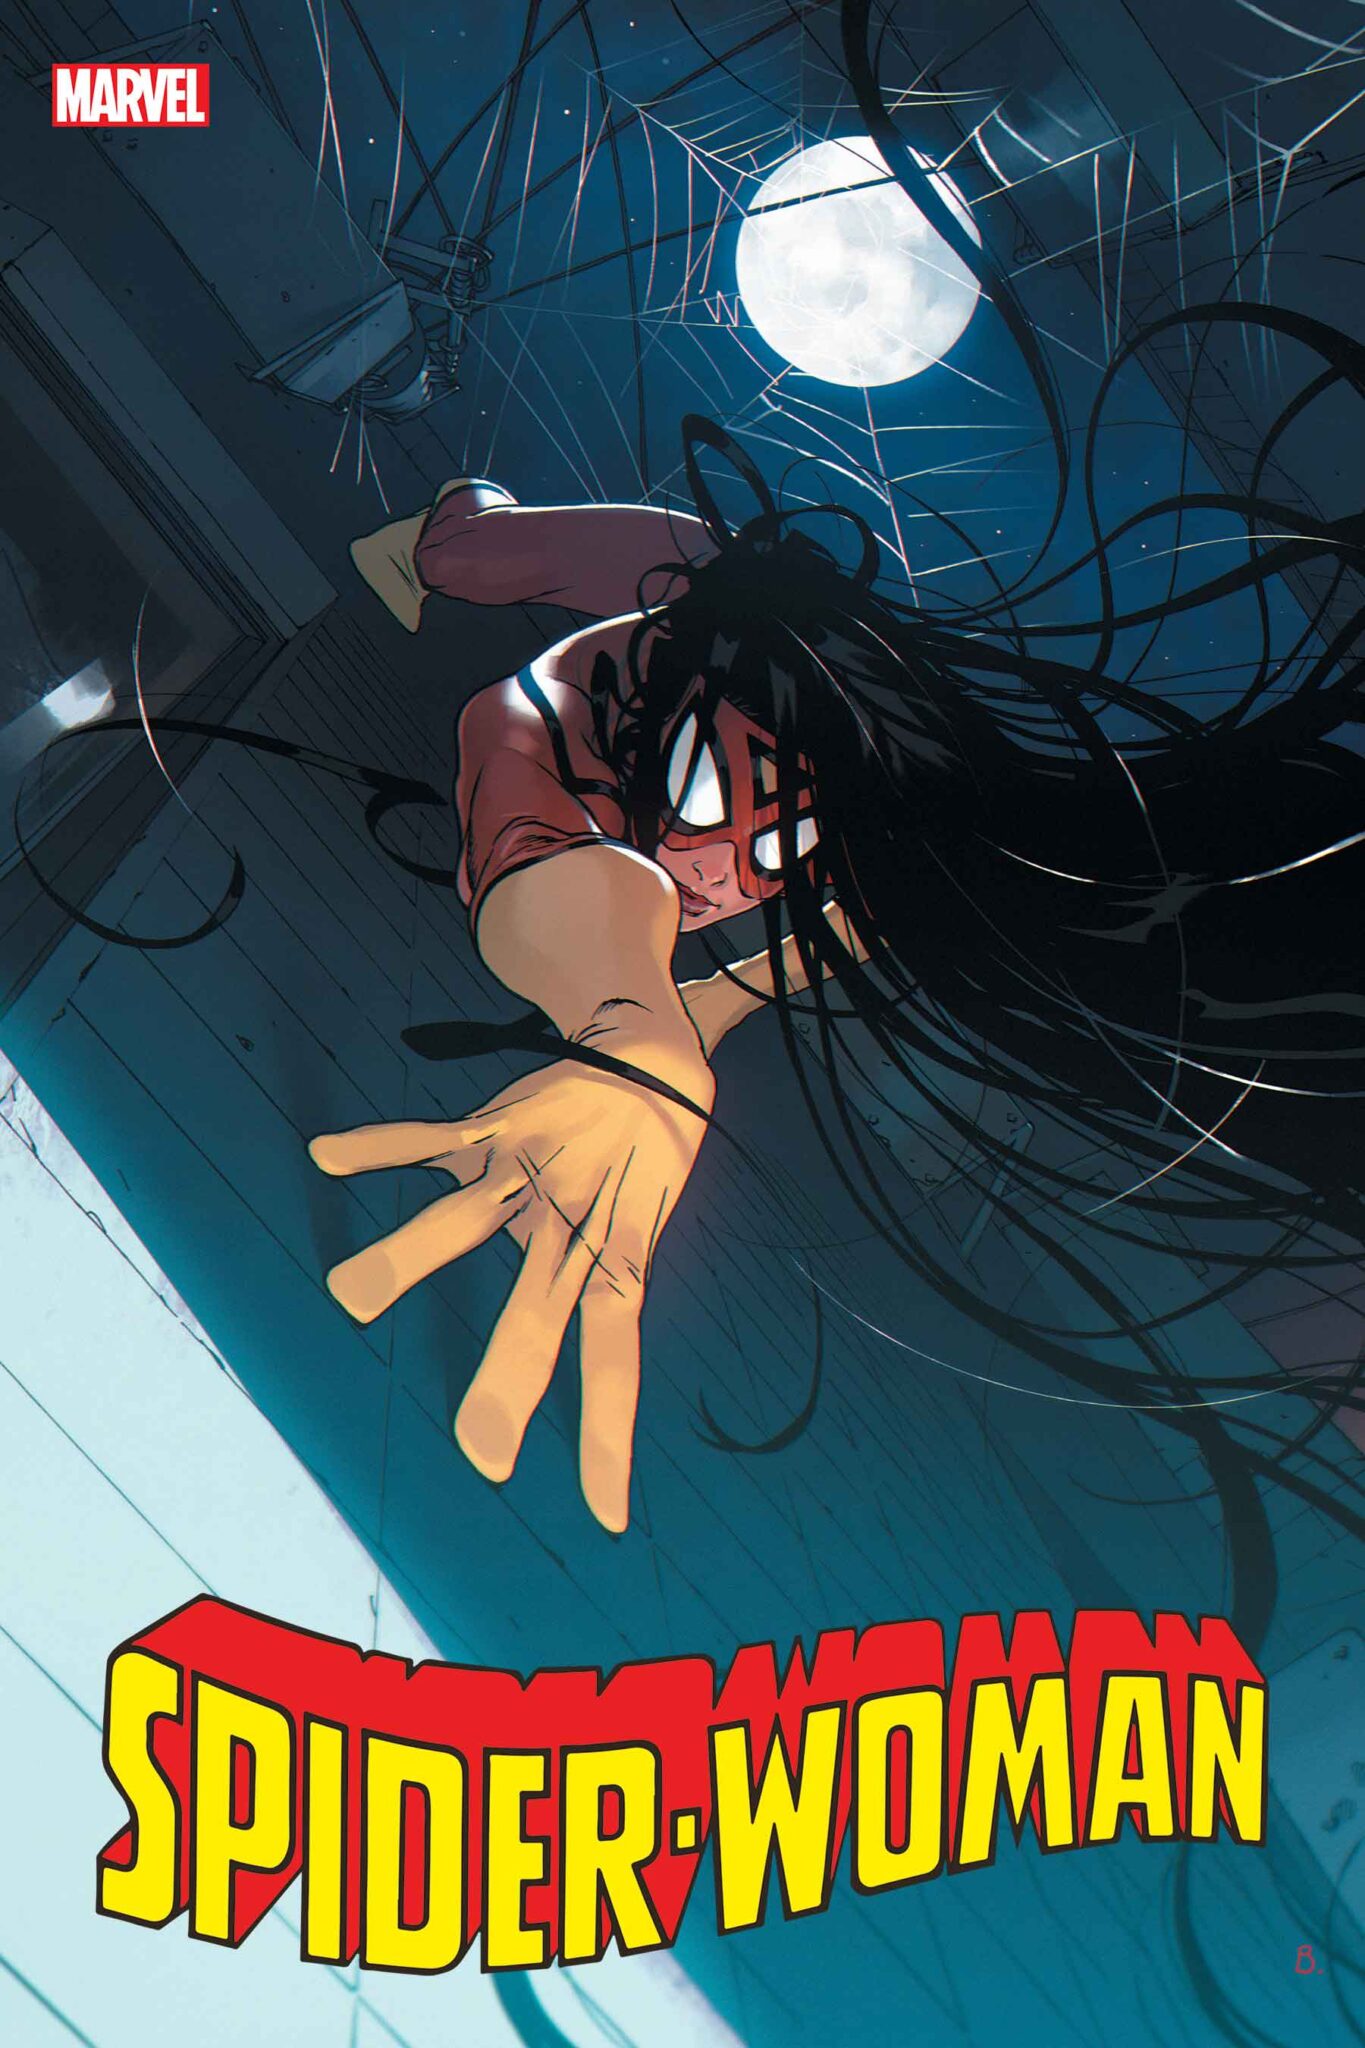 Spider Woman #1 Variant Cover by Bengal